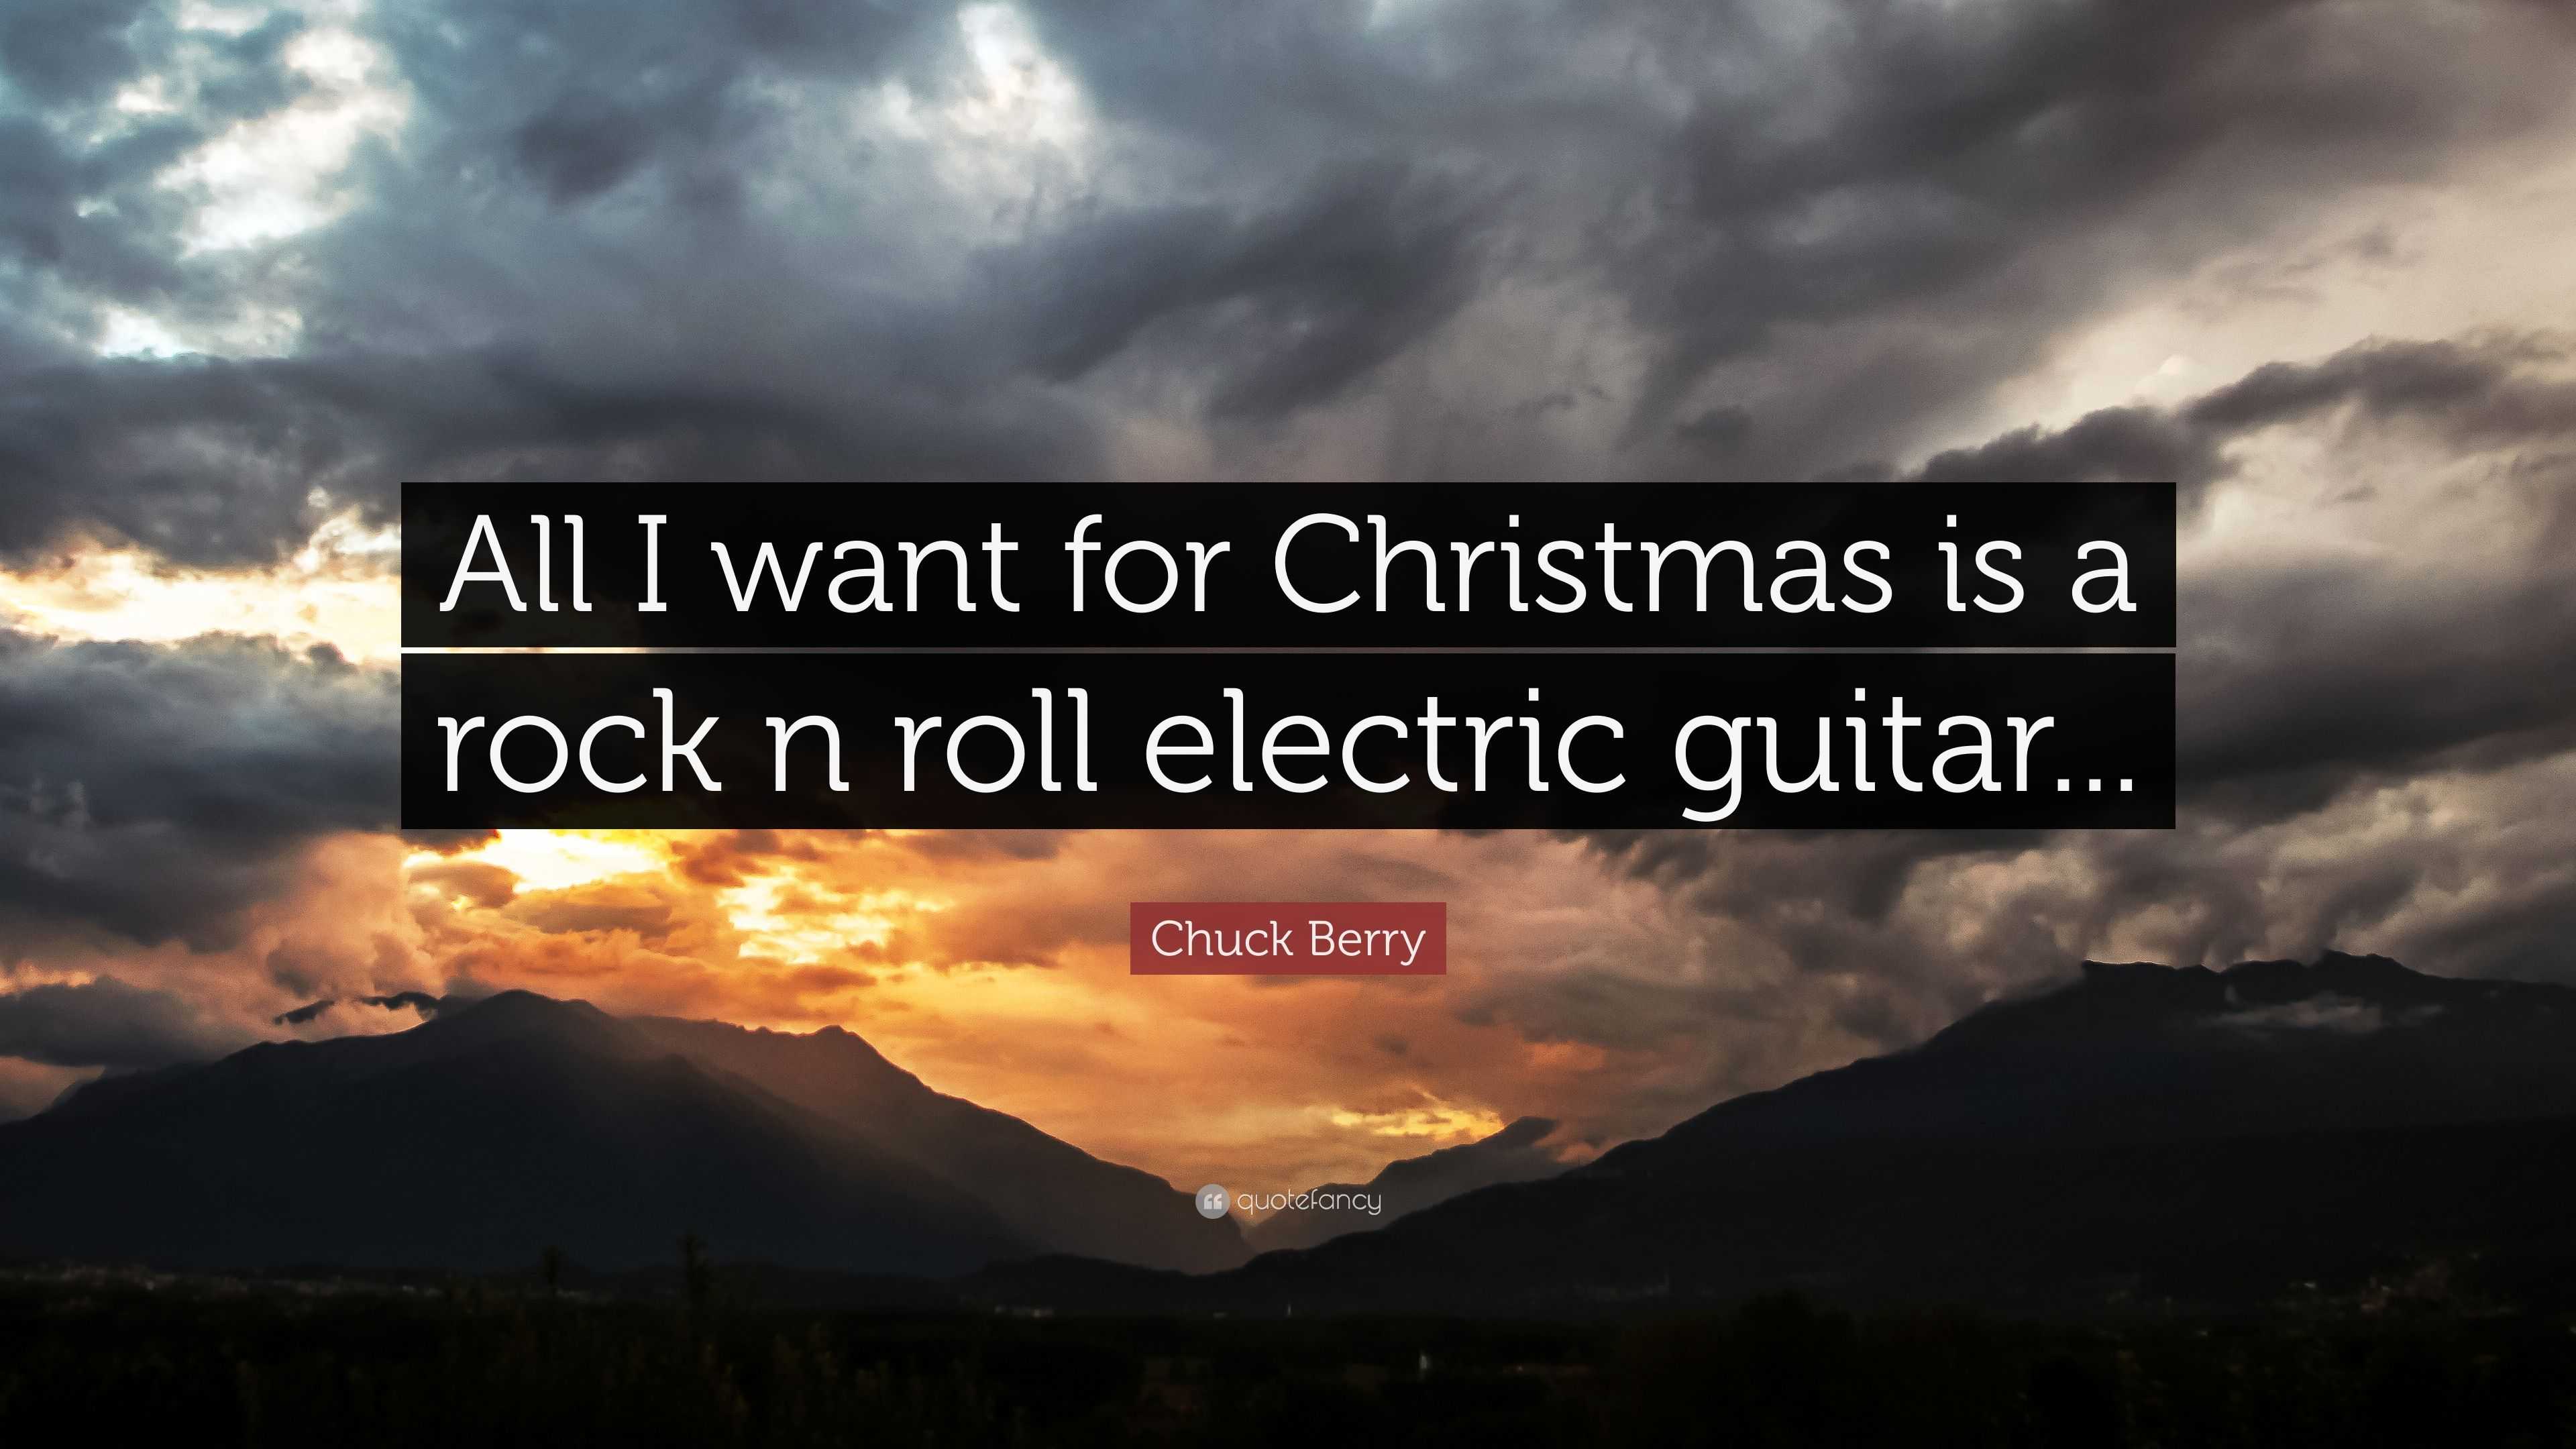 Chuck Berry Quote: “All I want for Christmas is a rock n roll electric guitar...” (7 wallpapers ...